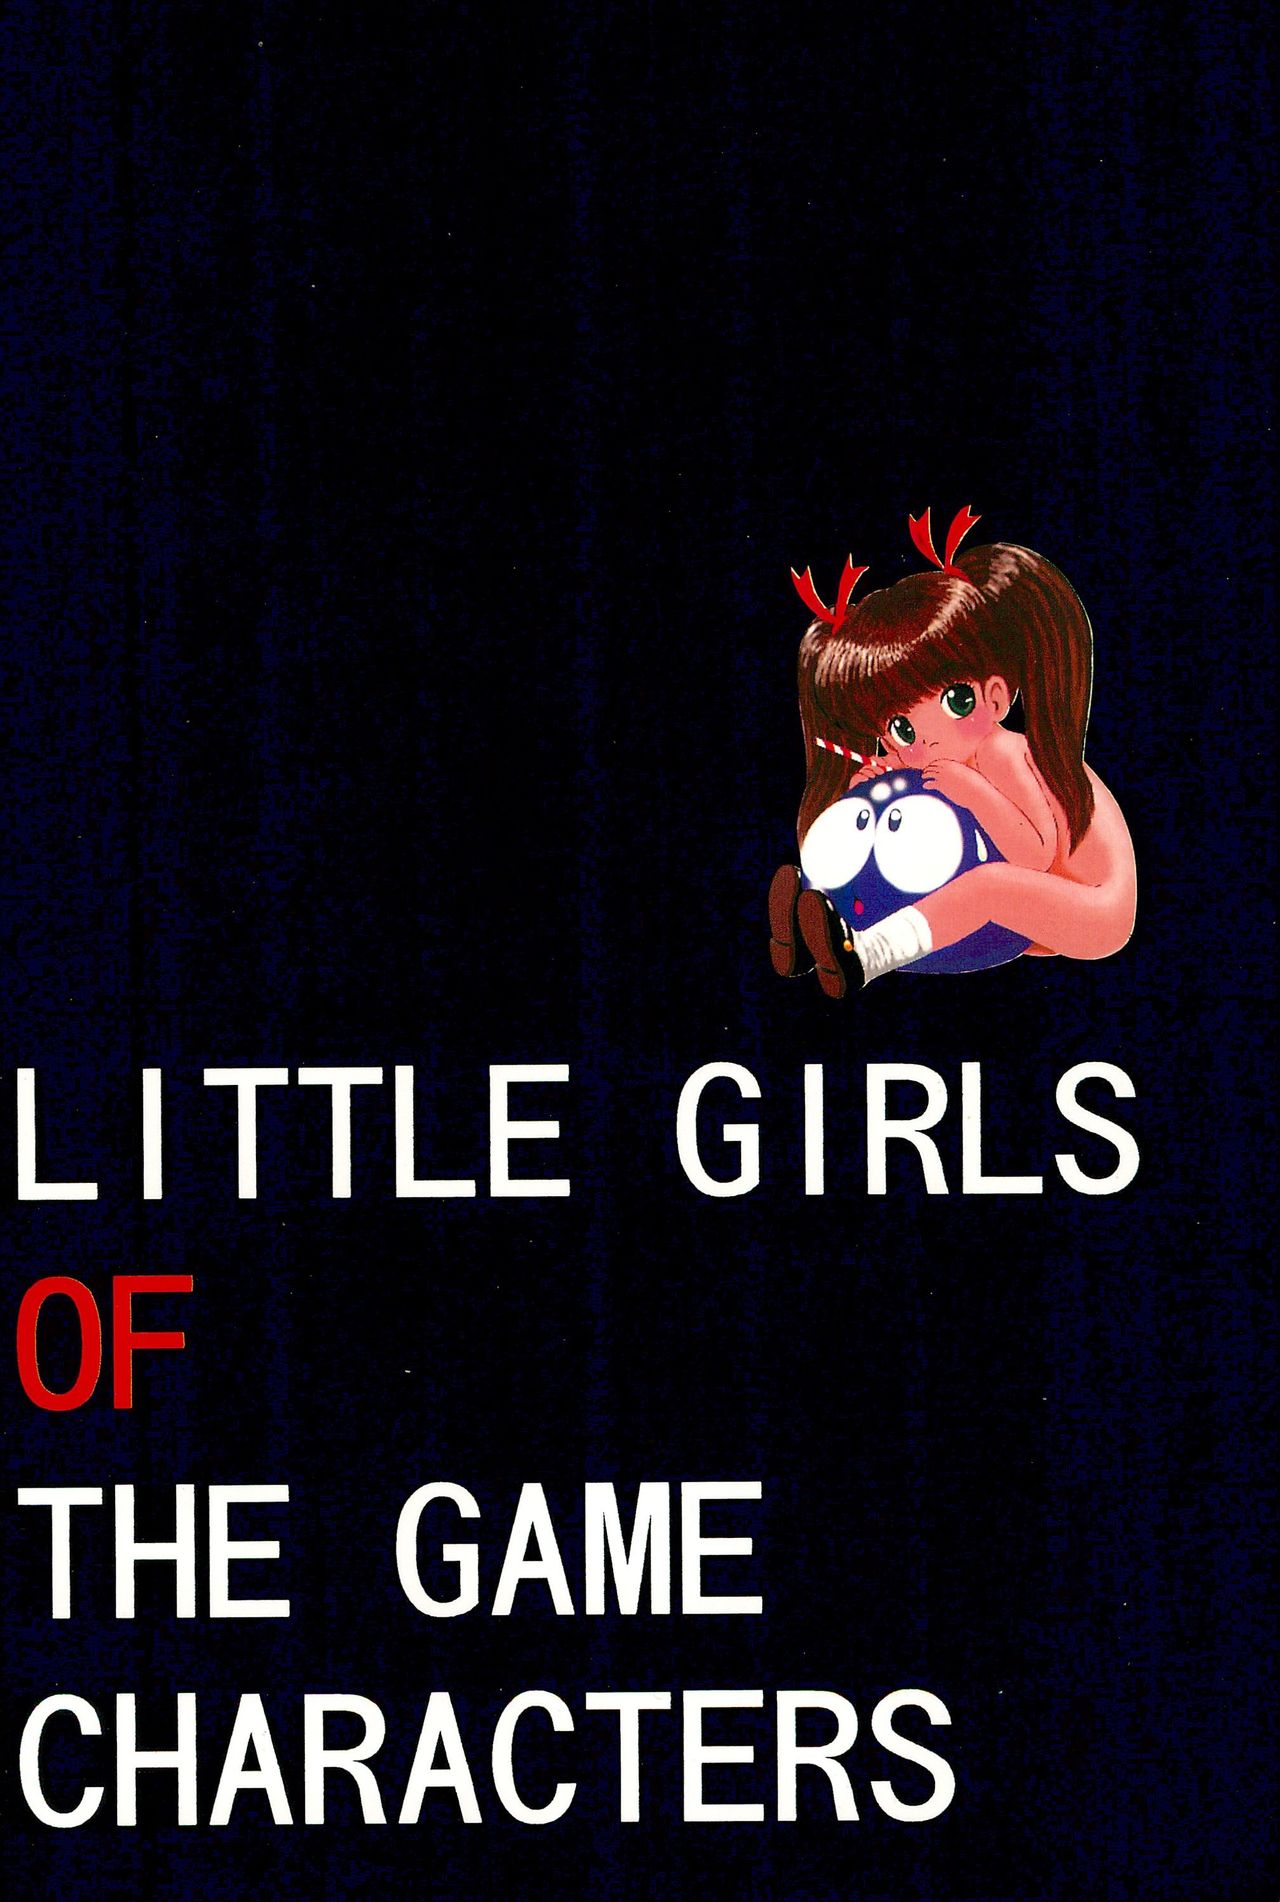 [SYSTEM GZZY (よろず)] LITTLE GIRLS OF THE GAME CHARACTERS 2+ (よろず)